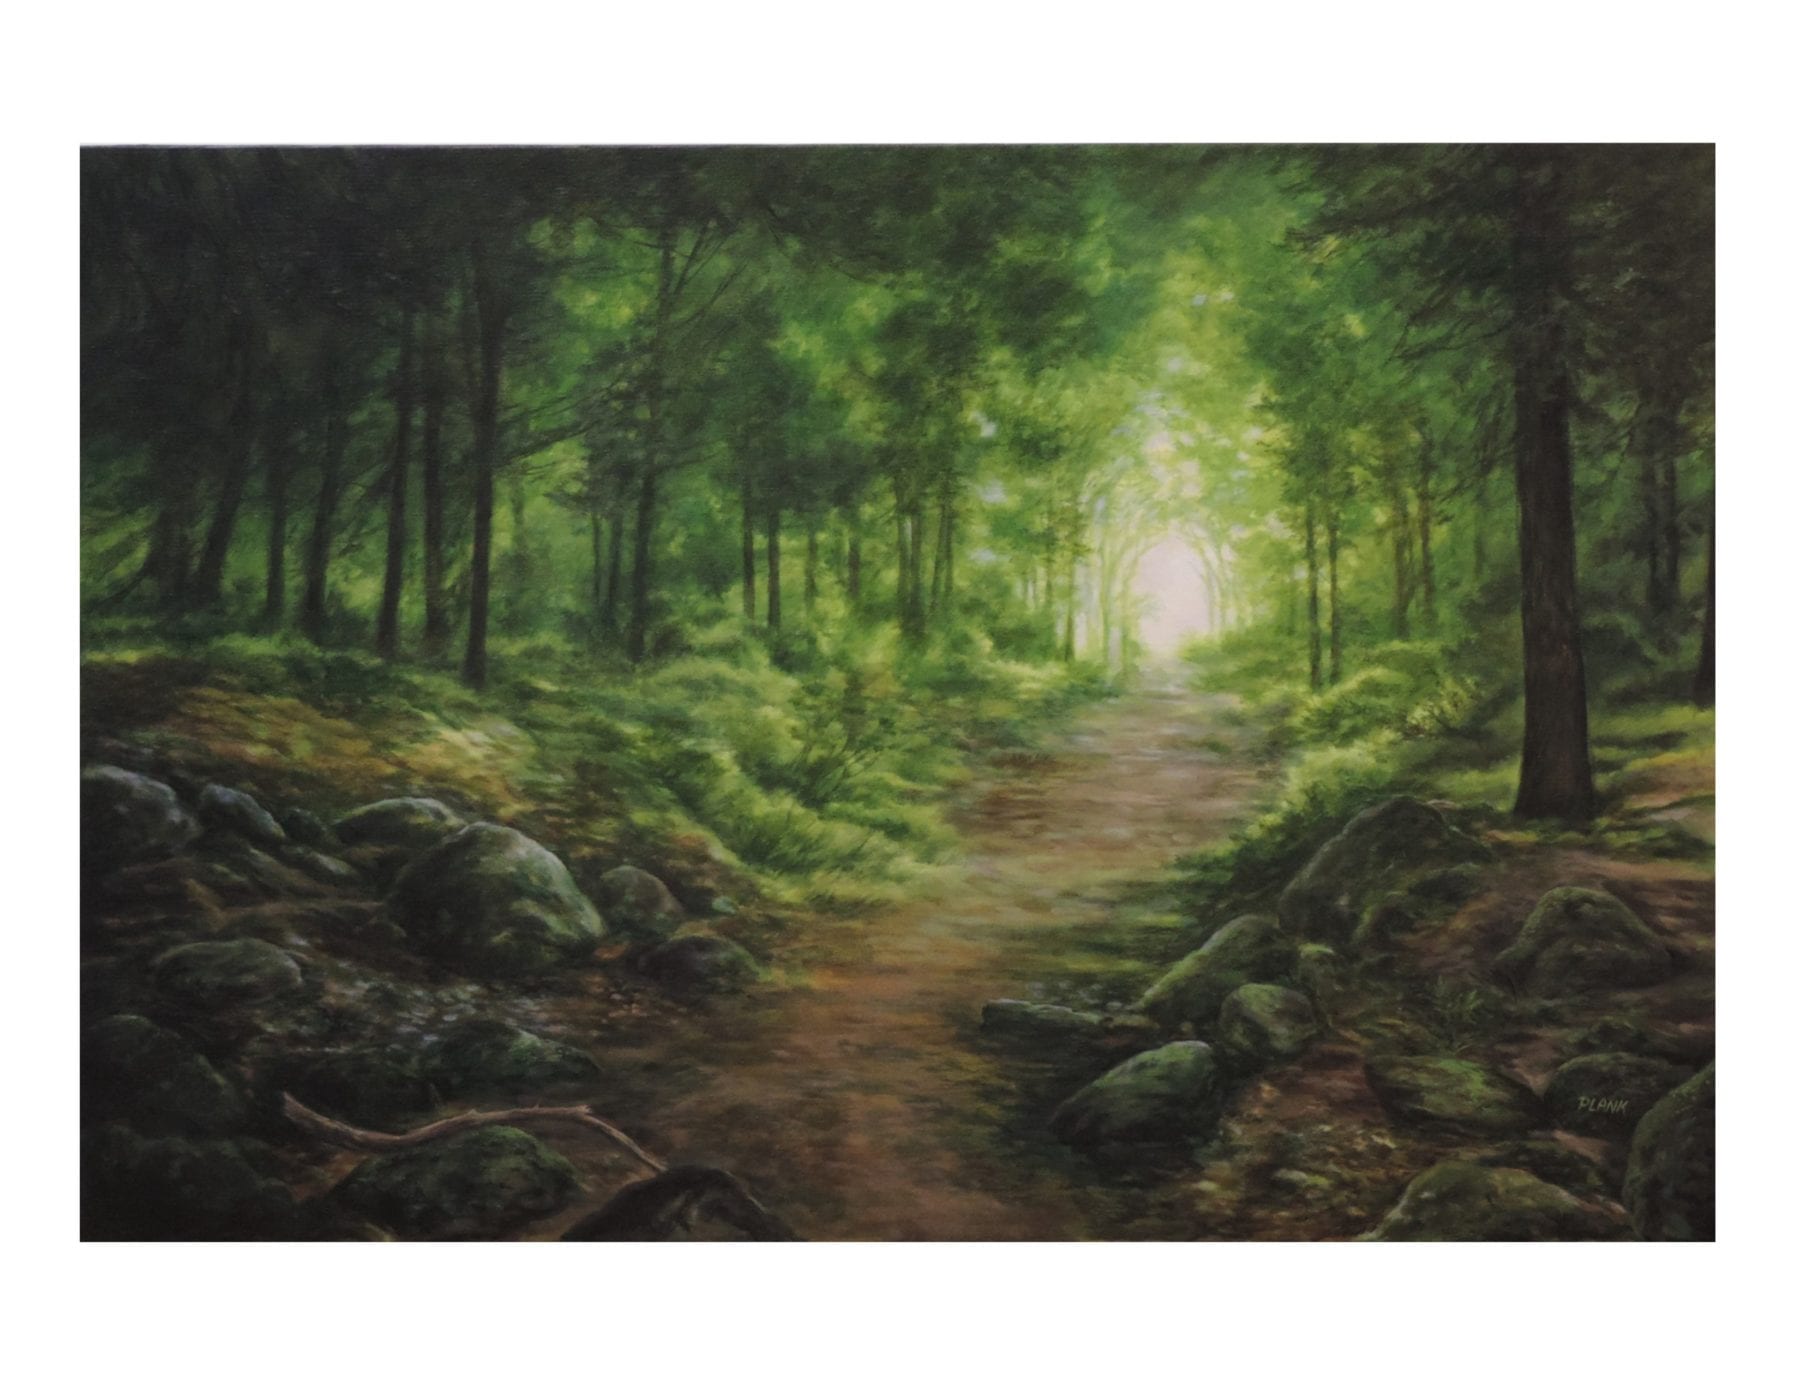 William Plank, Cathedral in the Woods, acrylics, 20 x 30 inches